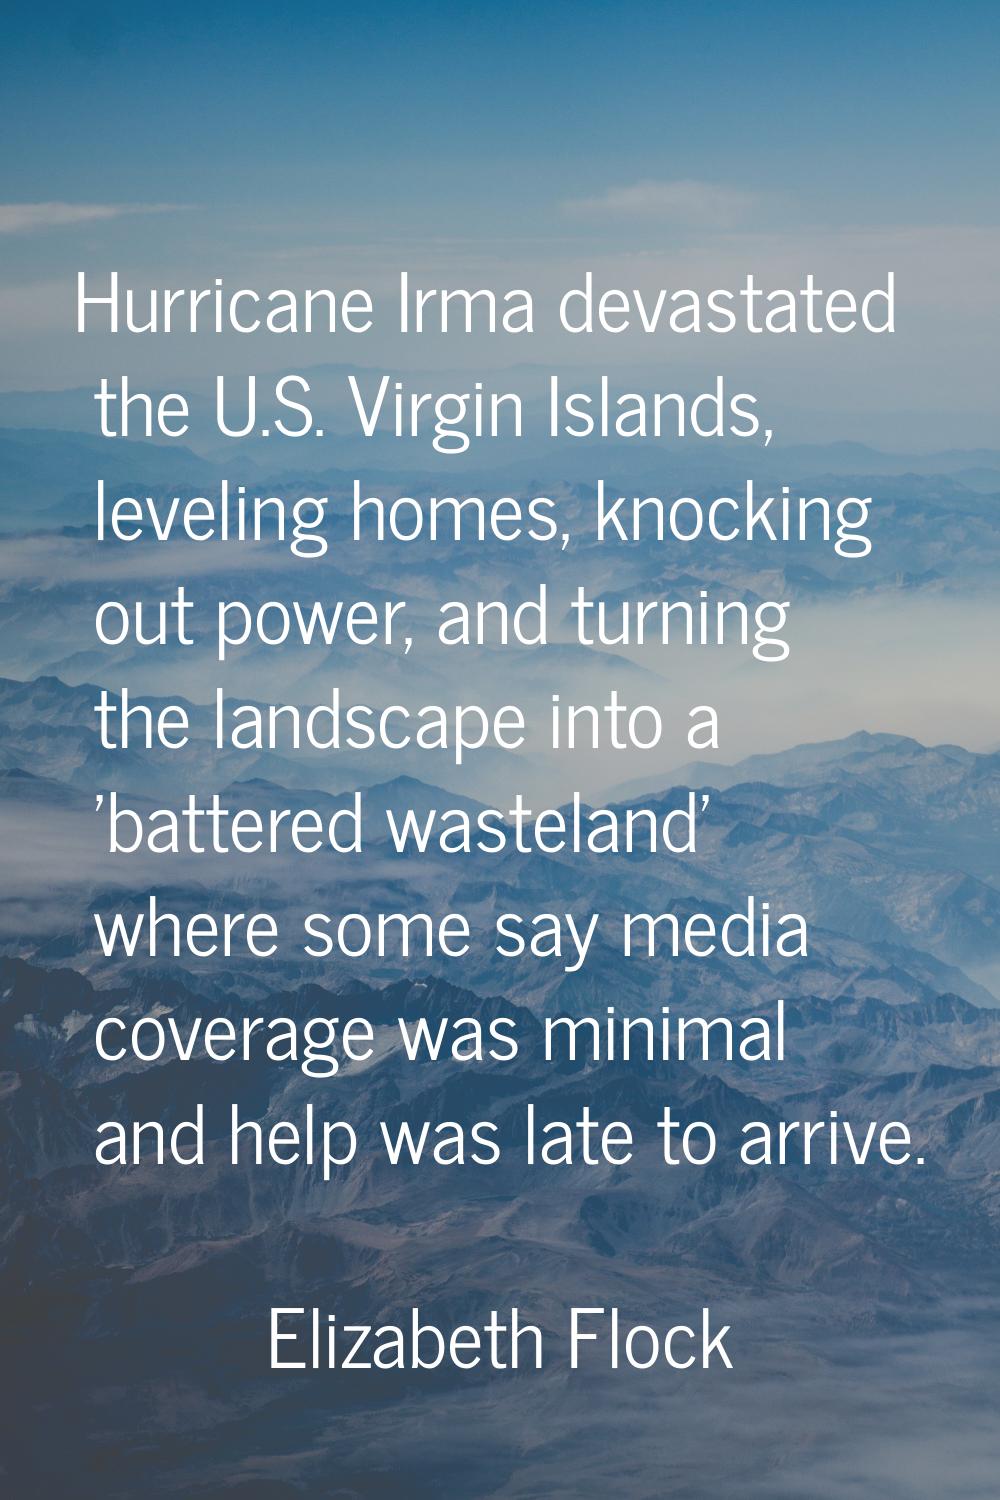 Hurricane Irma devastated the U.S. Virgin Islands, leveling homes, knocking out power, and turning 